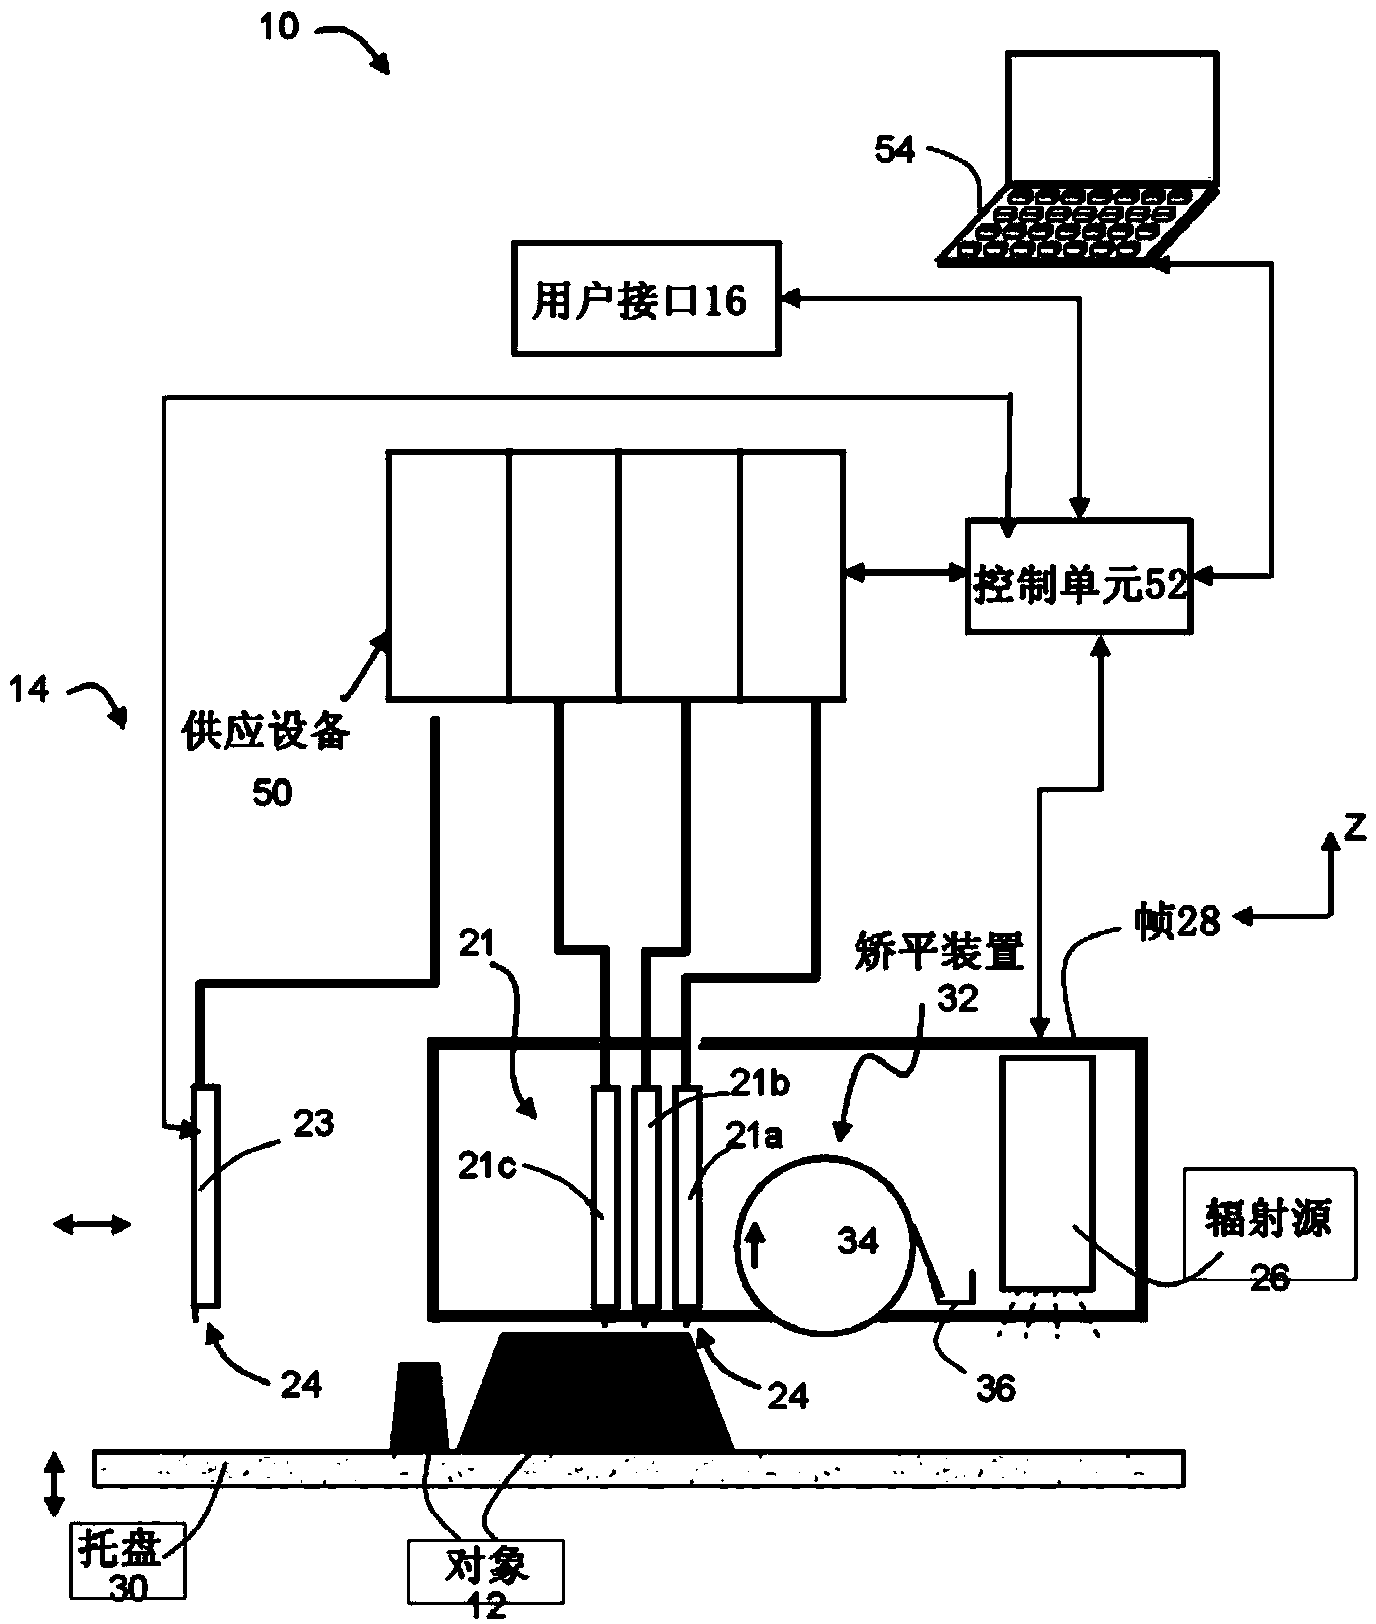 System and method for additive manufacturing of an object